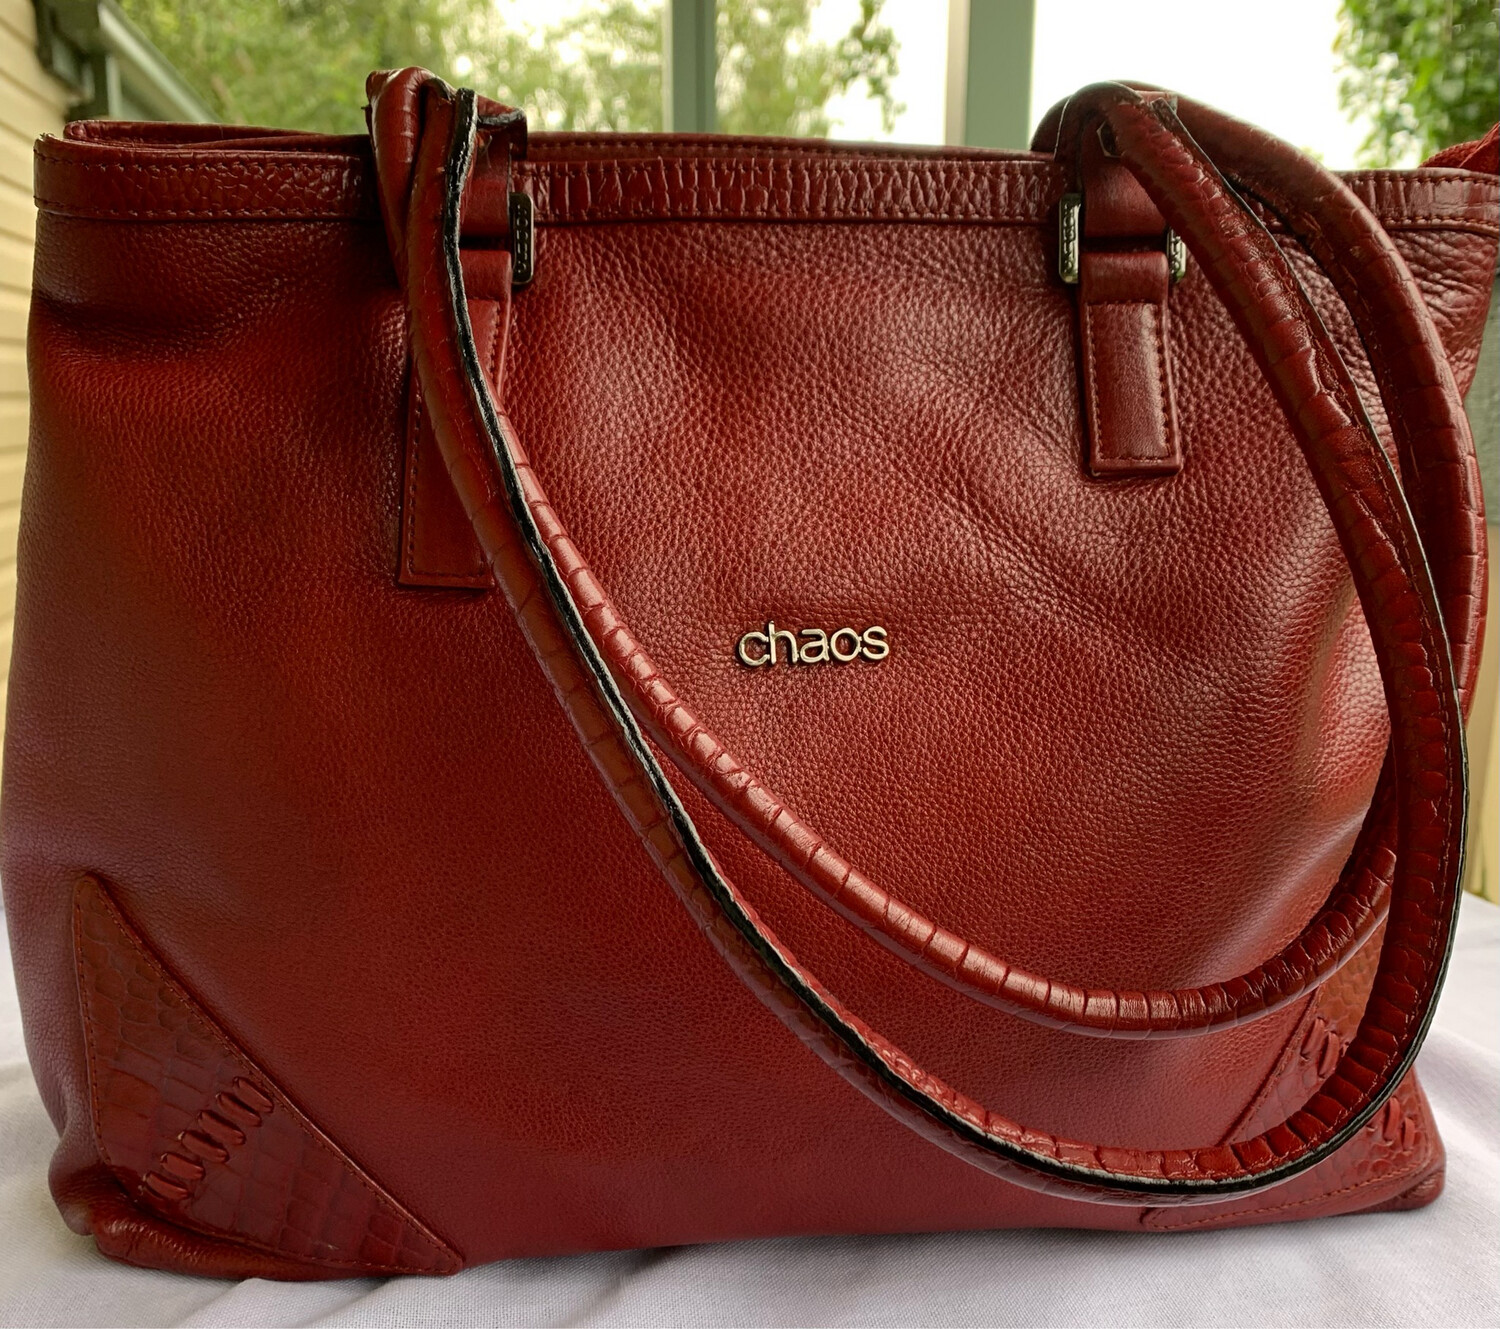 Hand Bag: Red Leather